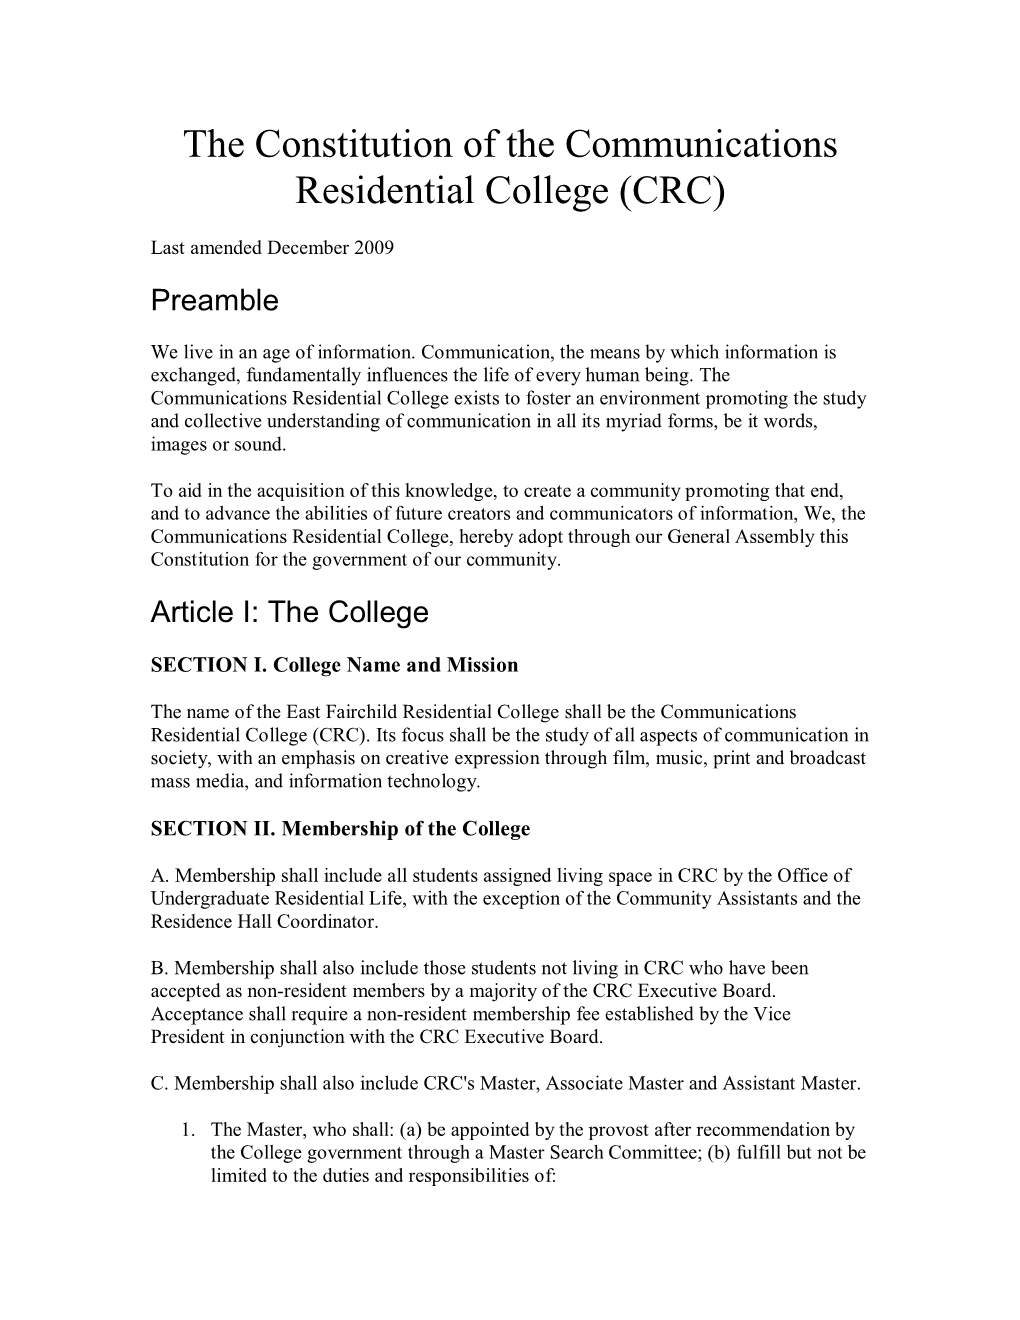 The Constitution of the Communications Residential College (CRC)